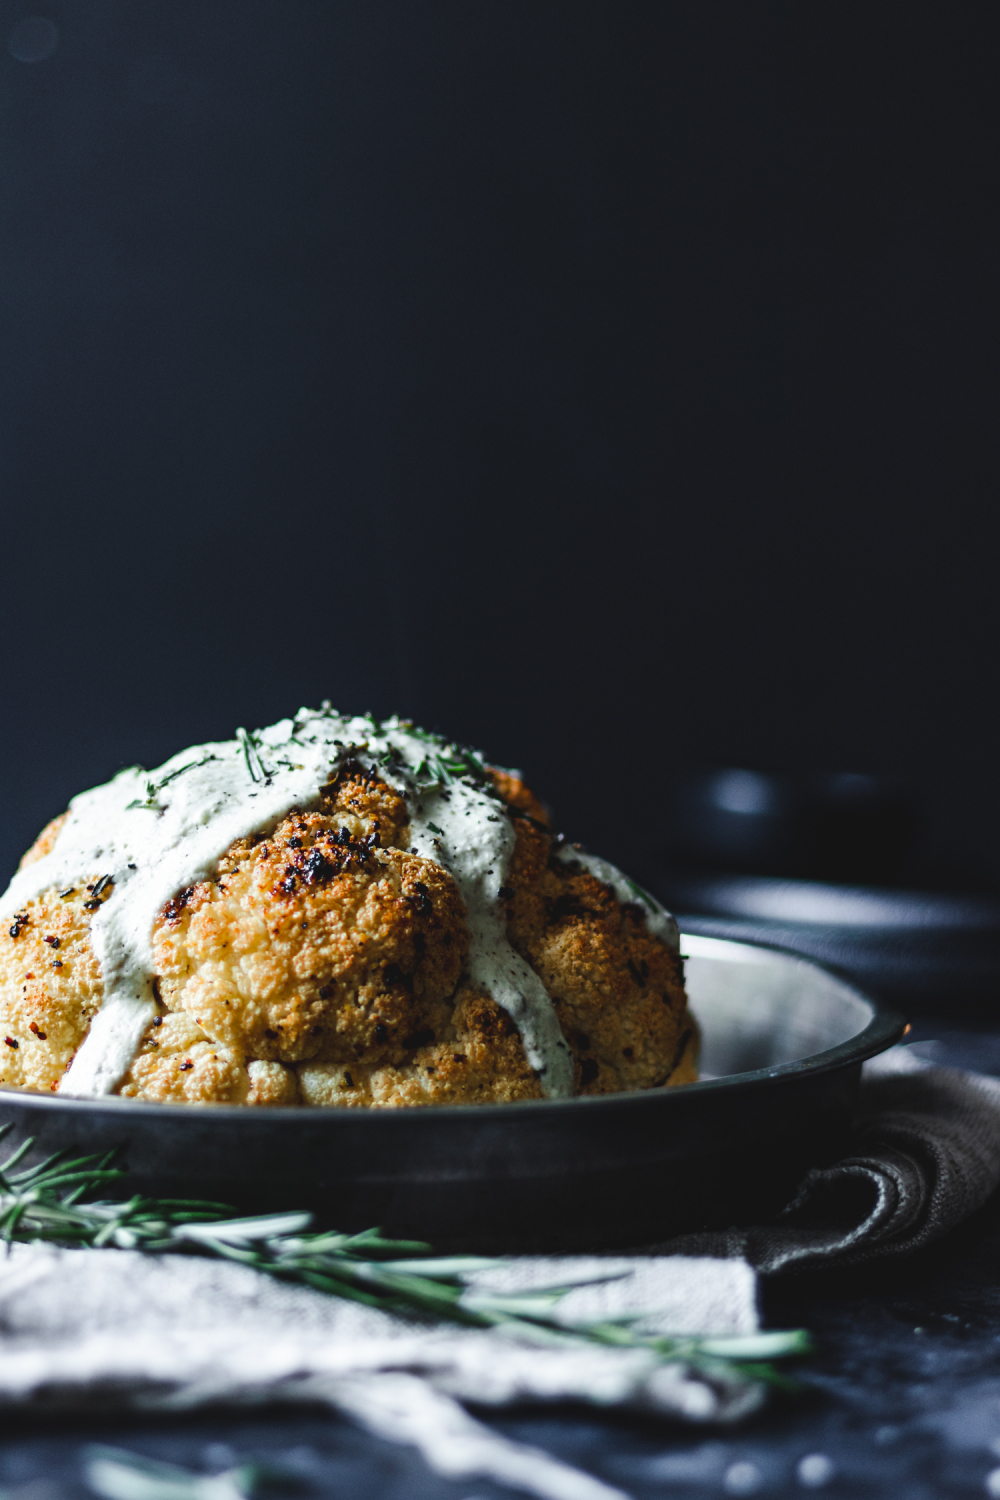 Whole roasted cauliflower with creamy sauce going down the sides